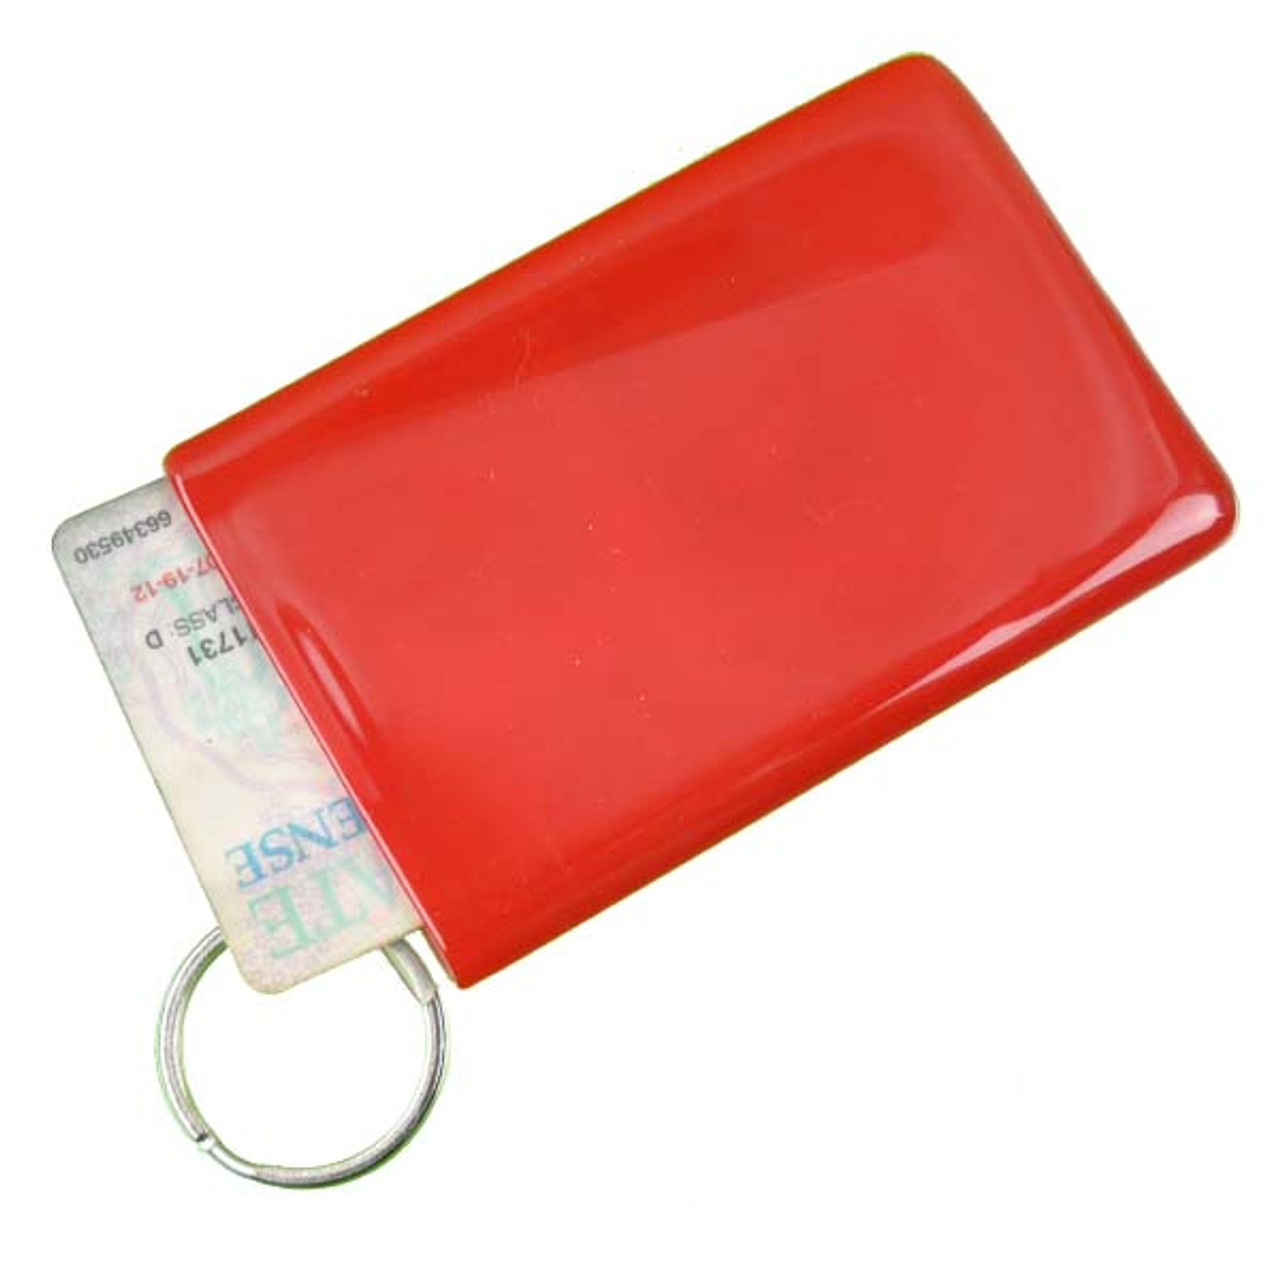 Shop for and Buy Fleet Key-Per Pouch at . Large